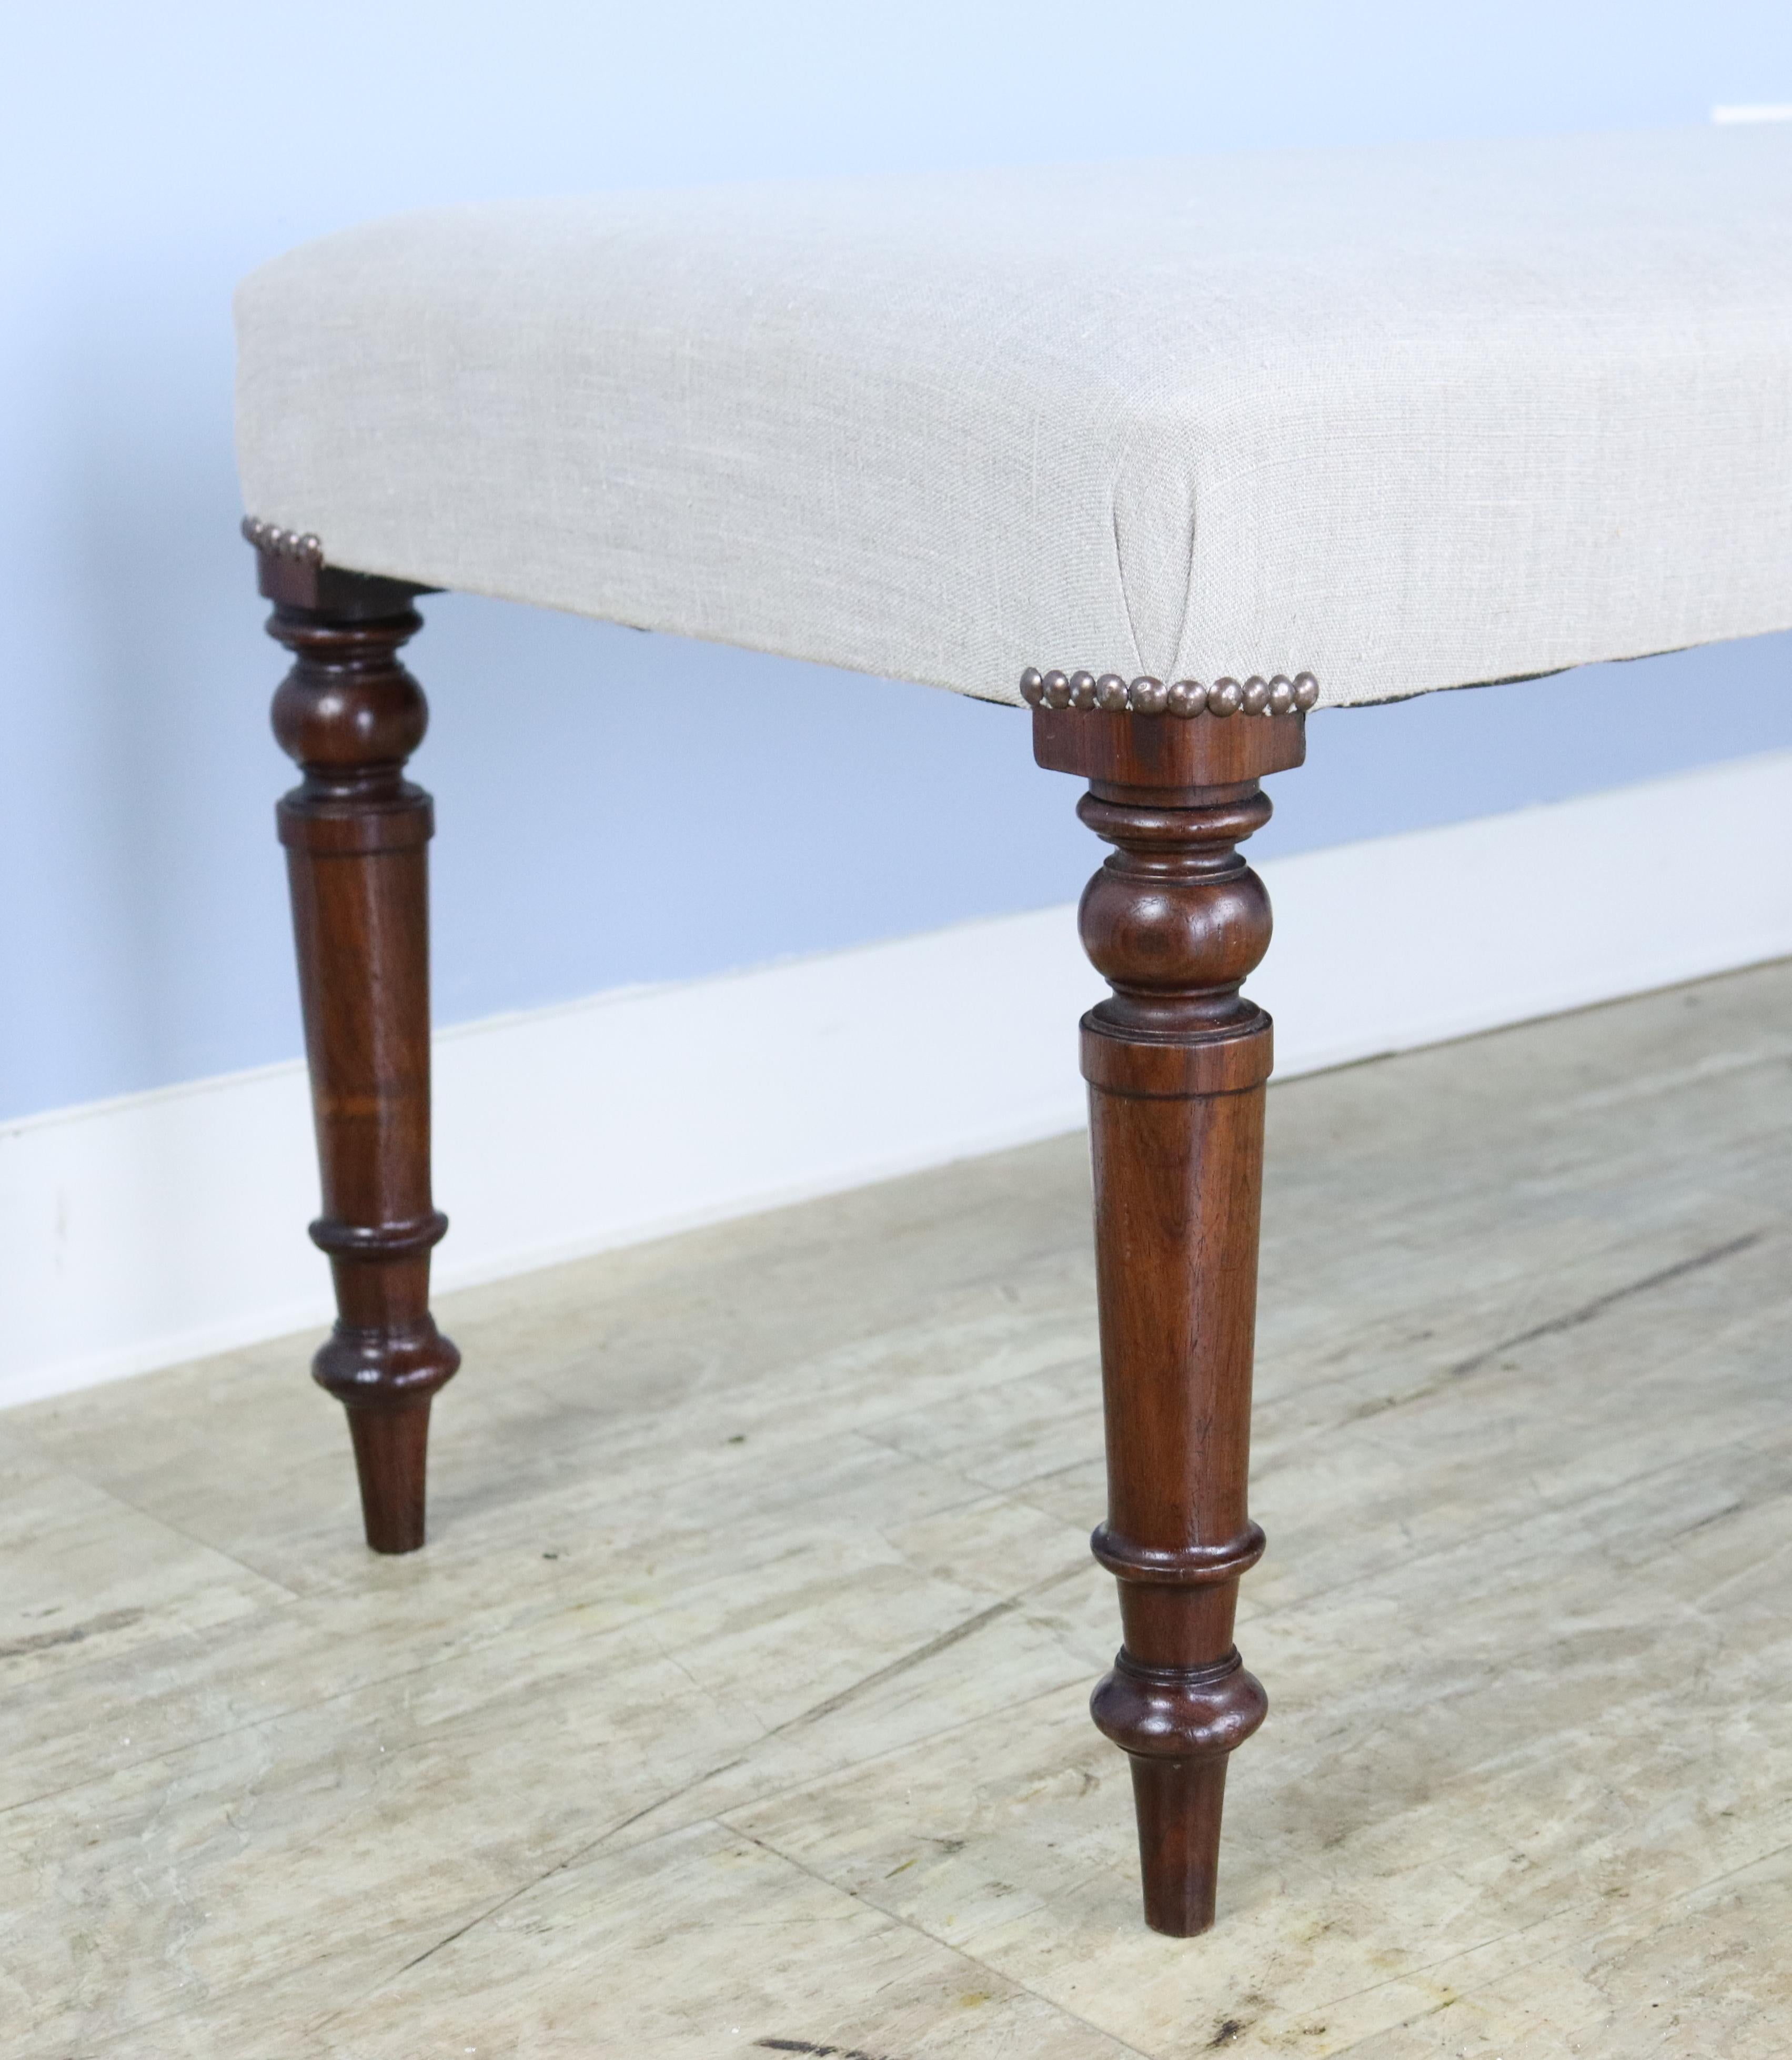 An elegant stool newly covered in French beige linen, with decorative nail heads at the edge of the seat. Constructed with mahogany legs, circa 1890 that are well-carved and sturdy. Very good sitting-height, comfortable seating at the end of the